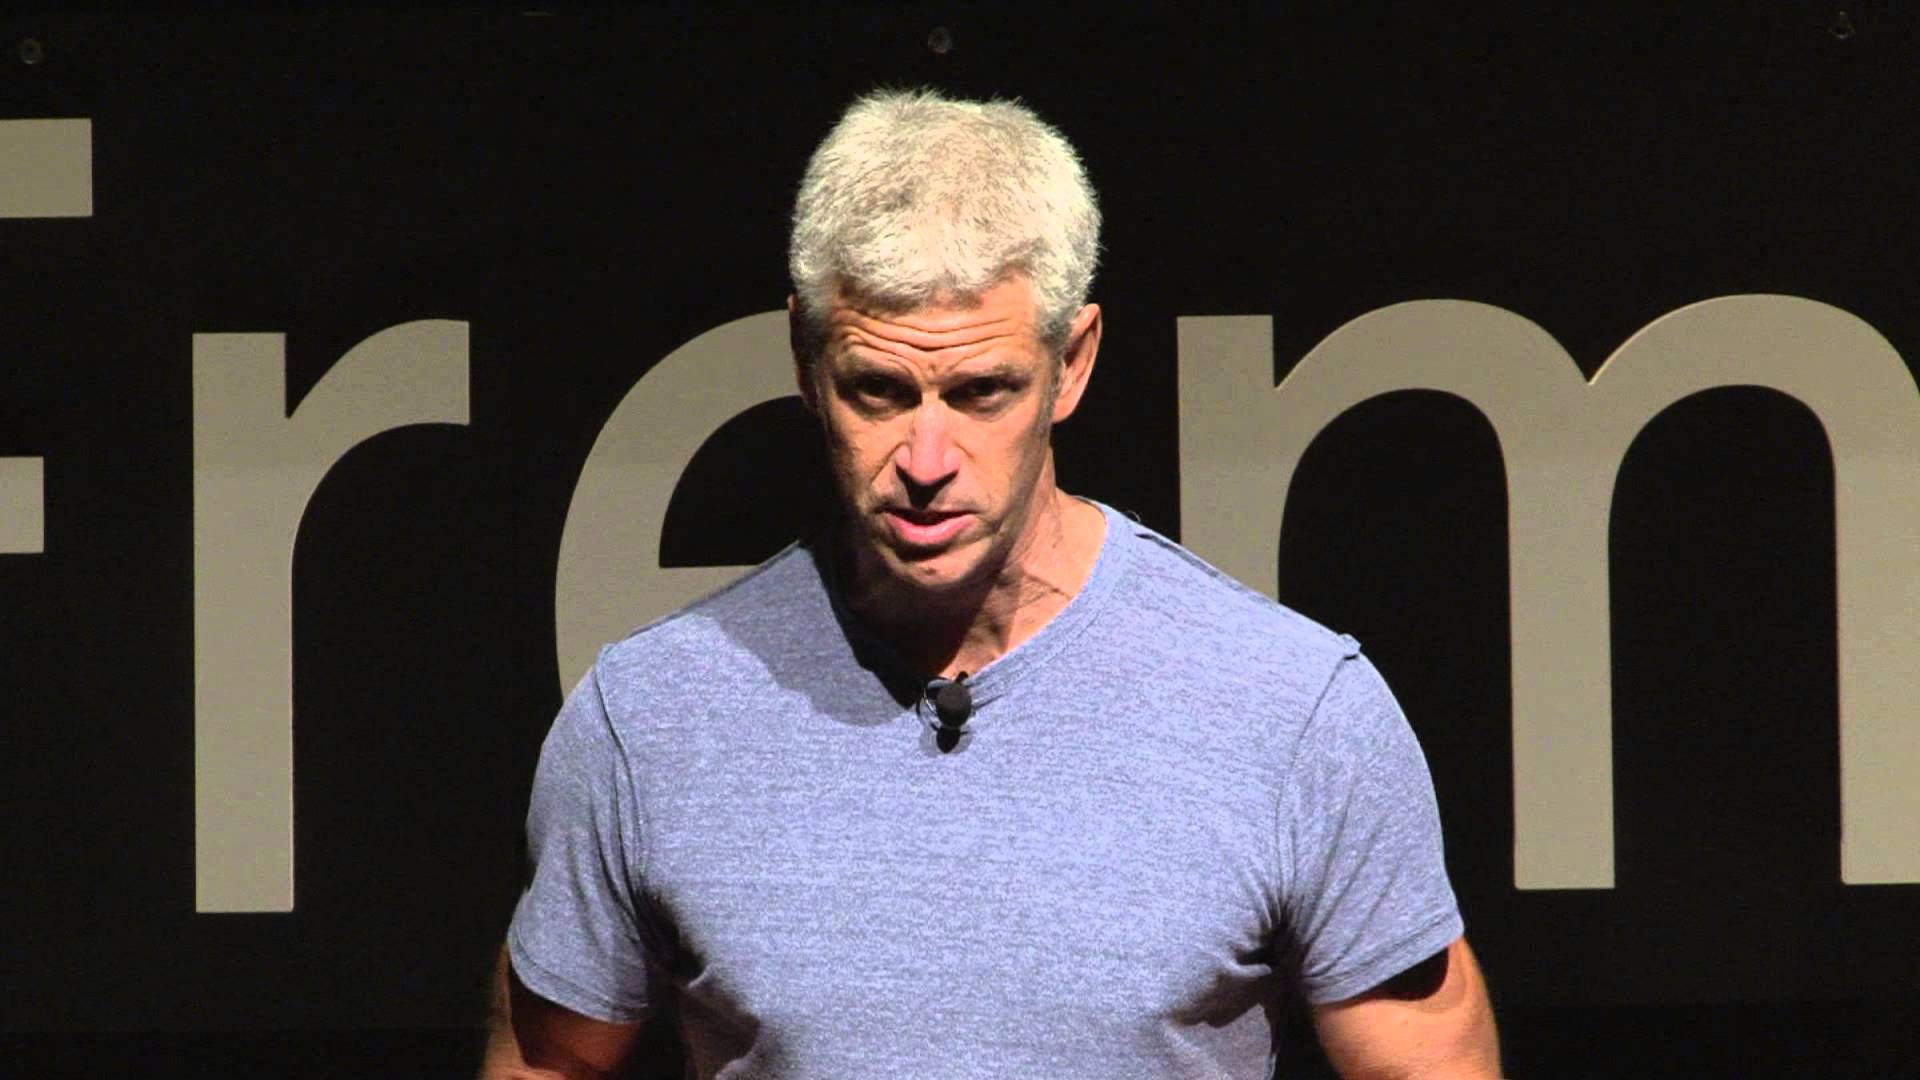 Rip Esselstyn at TEDx: Plant-Strong & Healthy Living